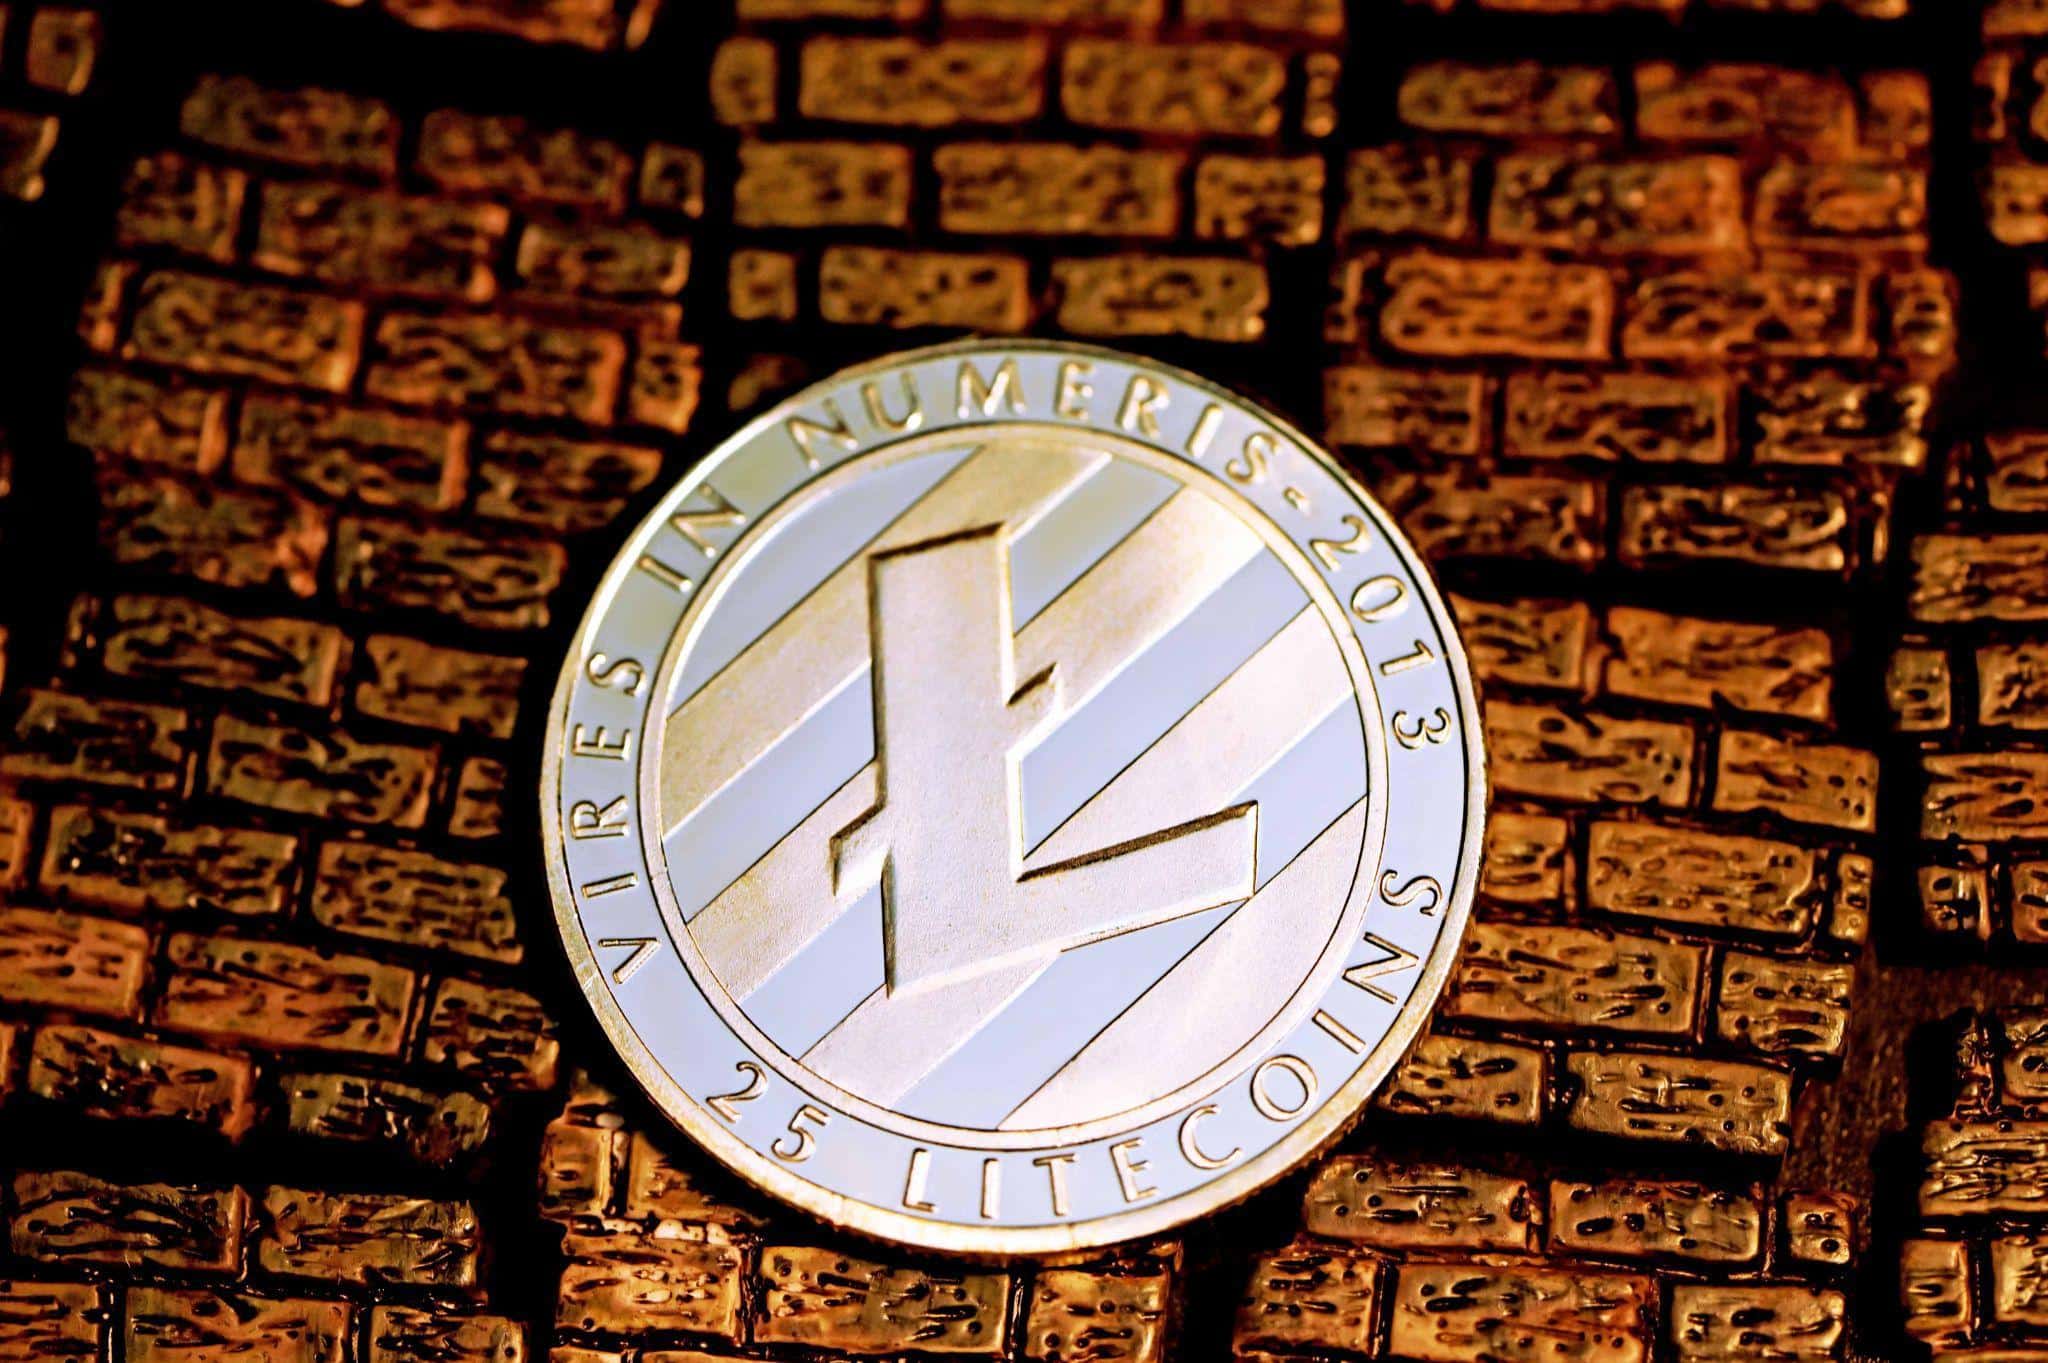 Image of the Litecoin logo on a brick background